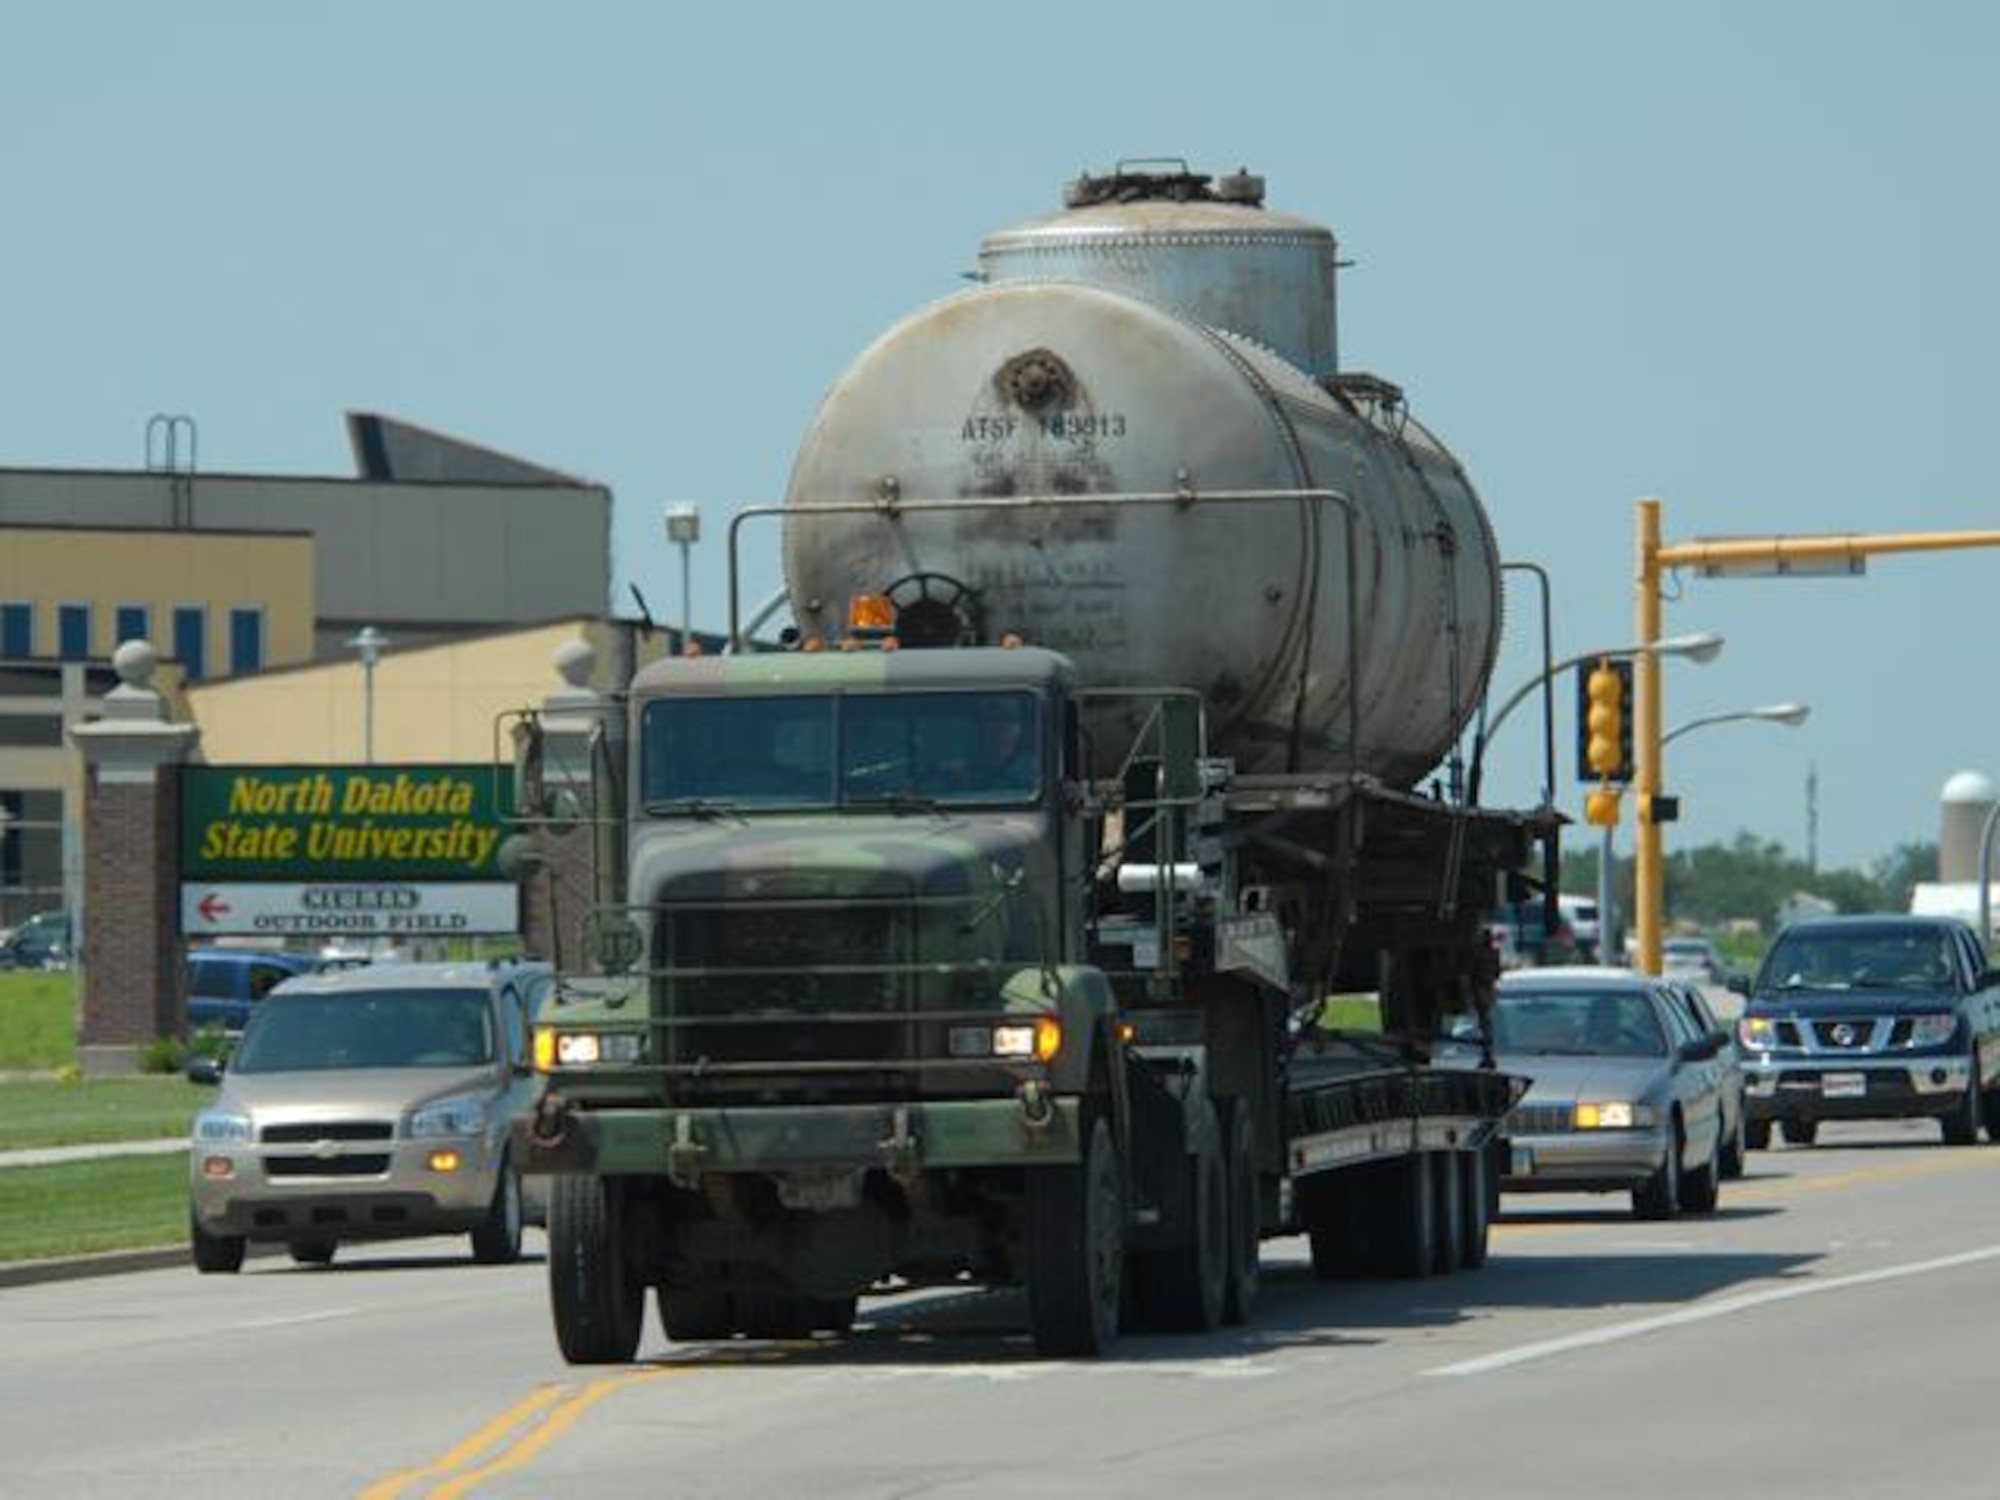 N.D. Air and Army National Guard members transport a railcar via a flatbed truck down 19th Ave. in Fargo N.D. on Wed. Jul 9, 2008.  Two railcars, donated by Burlington Northern Santa Fe Railroad, will be used for training at the N.D. Air National Guard base.  